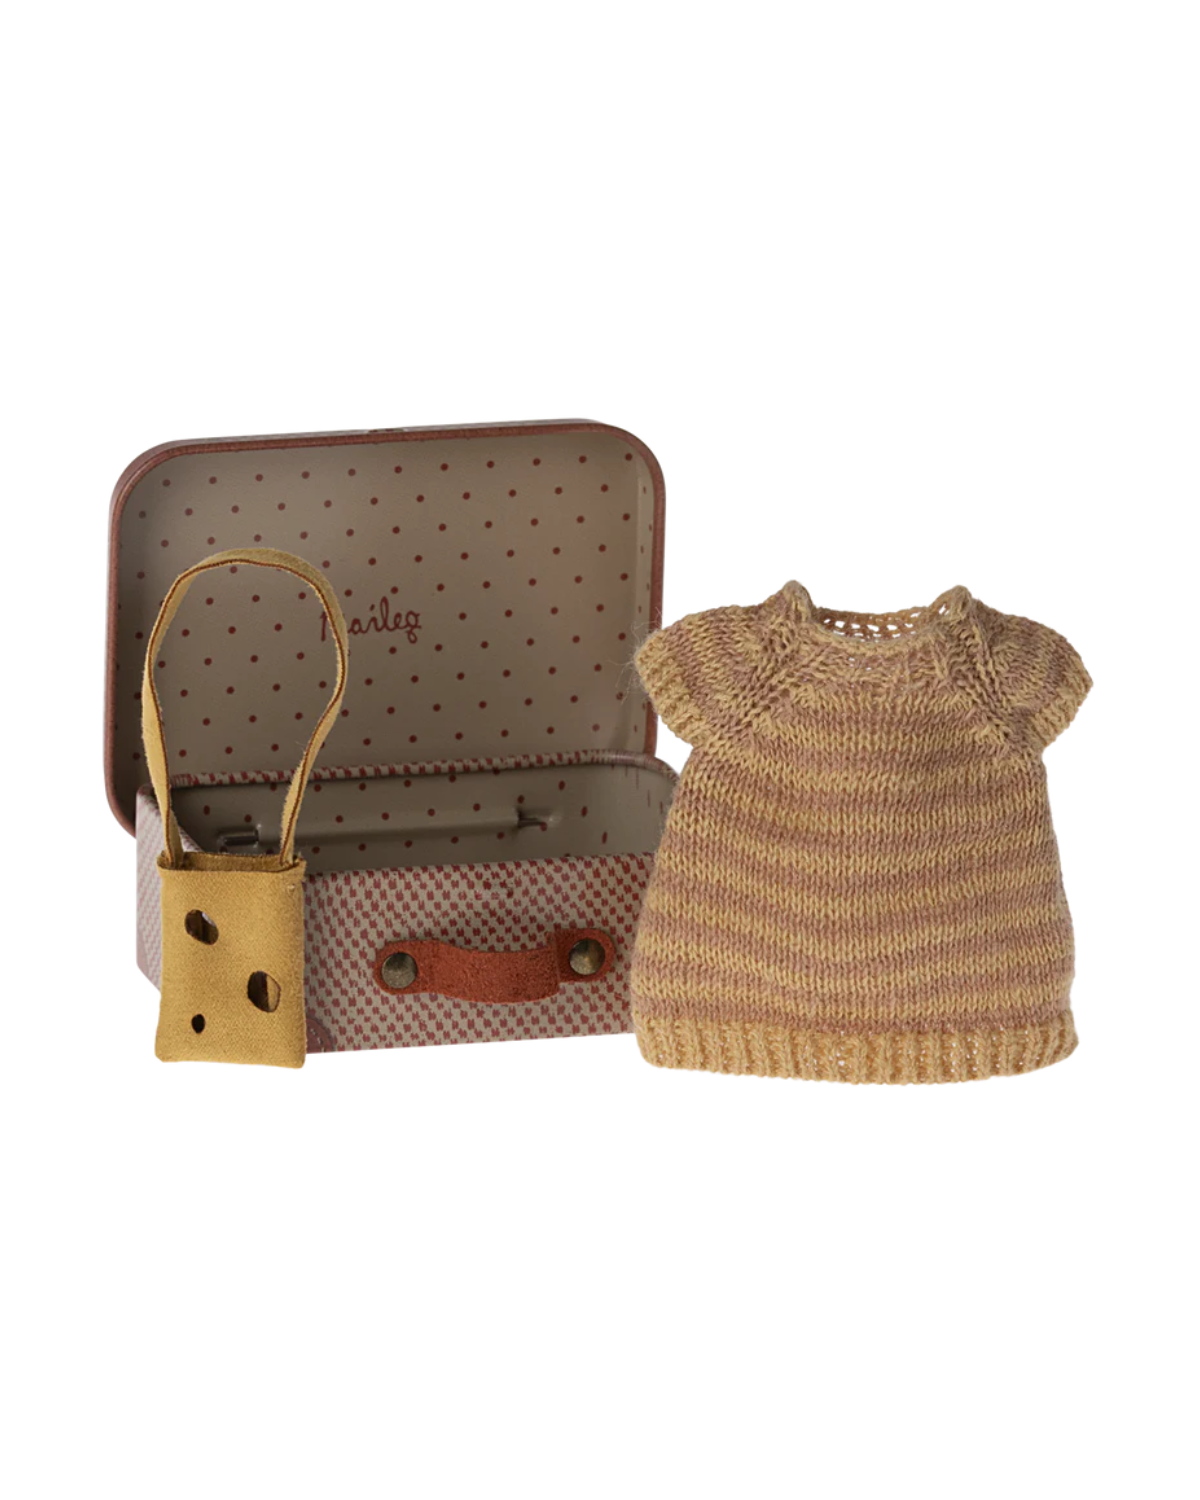 Maileg Knitted Dress & Bag - Big Sister Mouse's Outfit